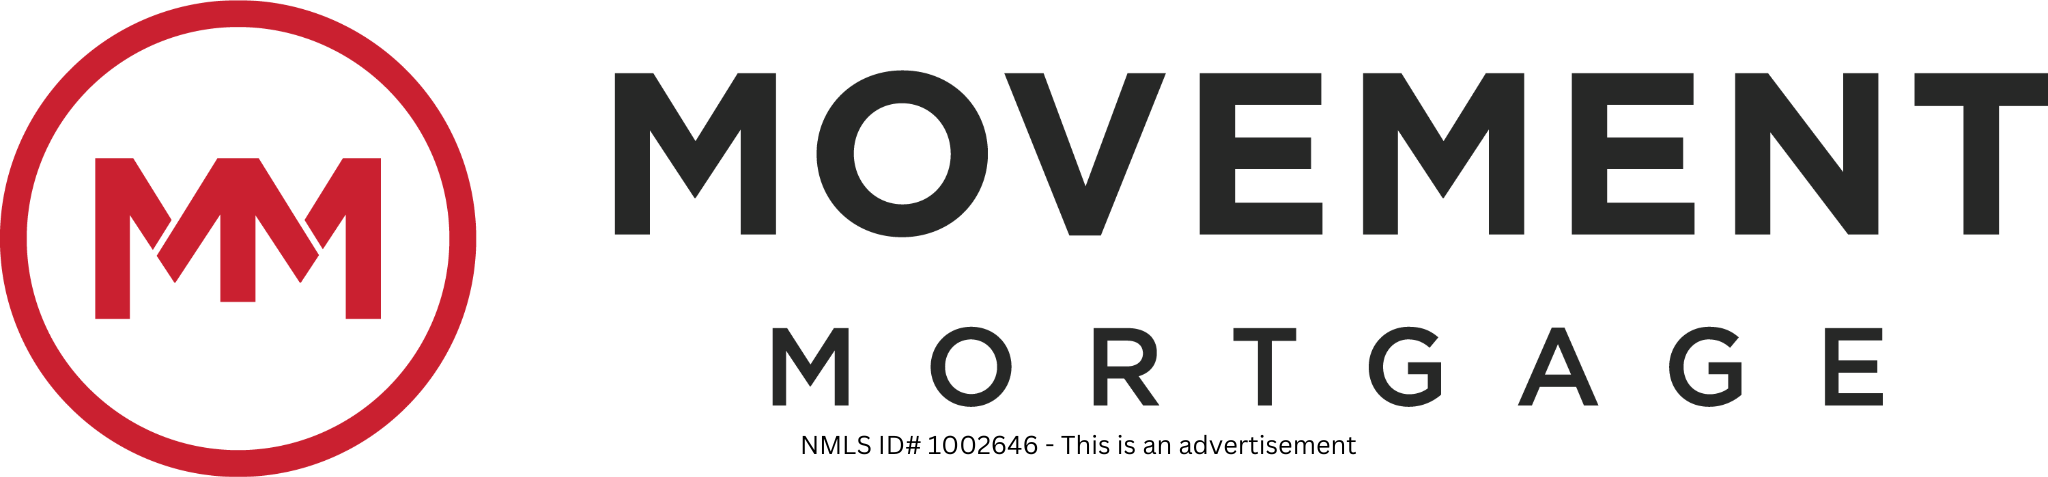 NMLS#1002646 - This is an advertisement(1)